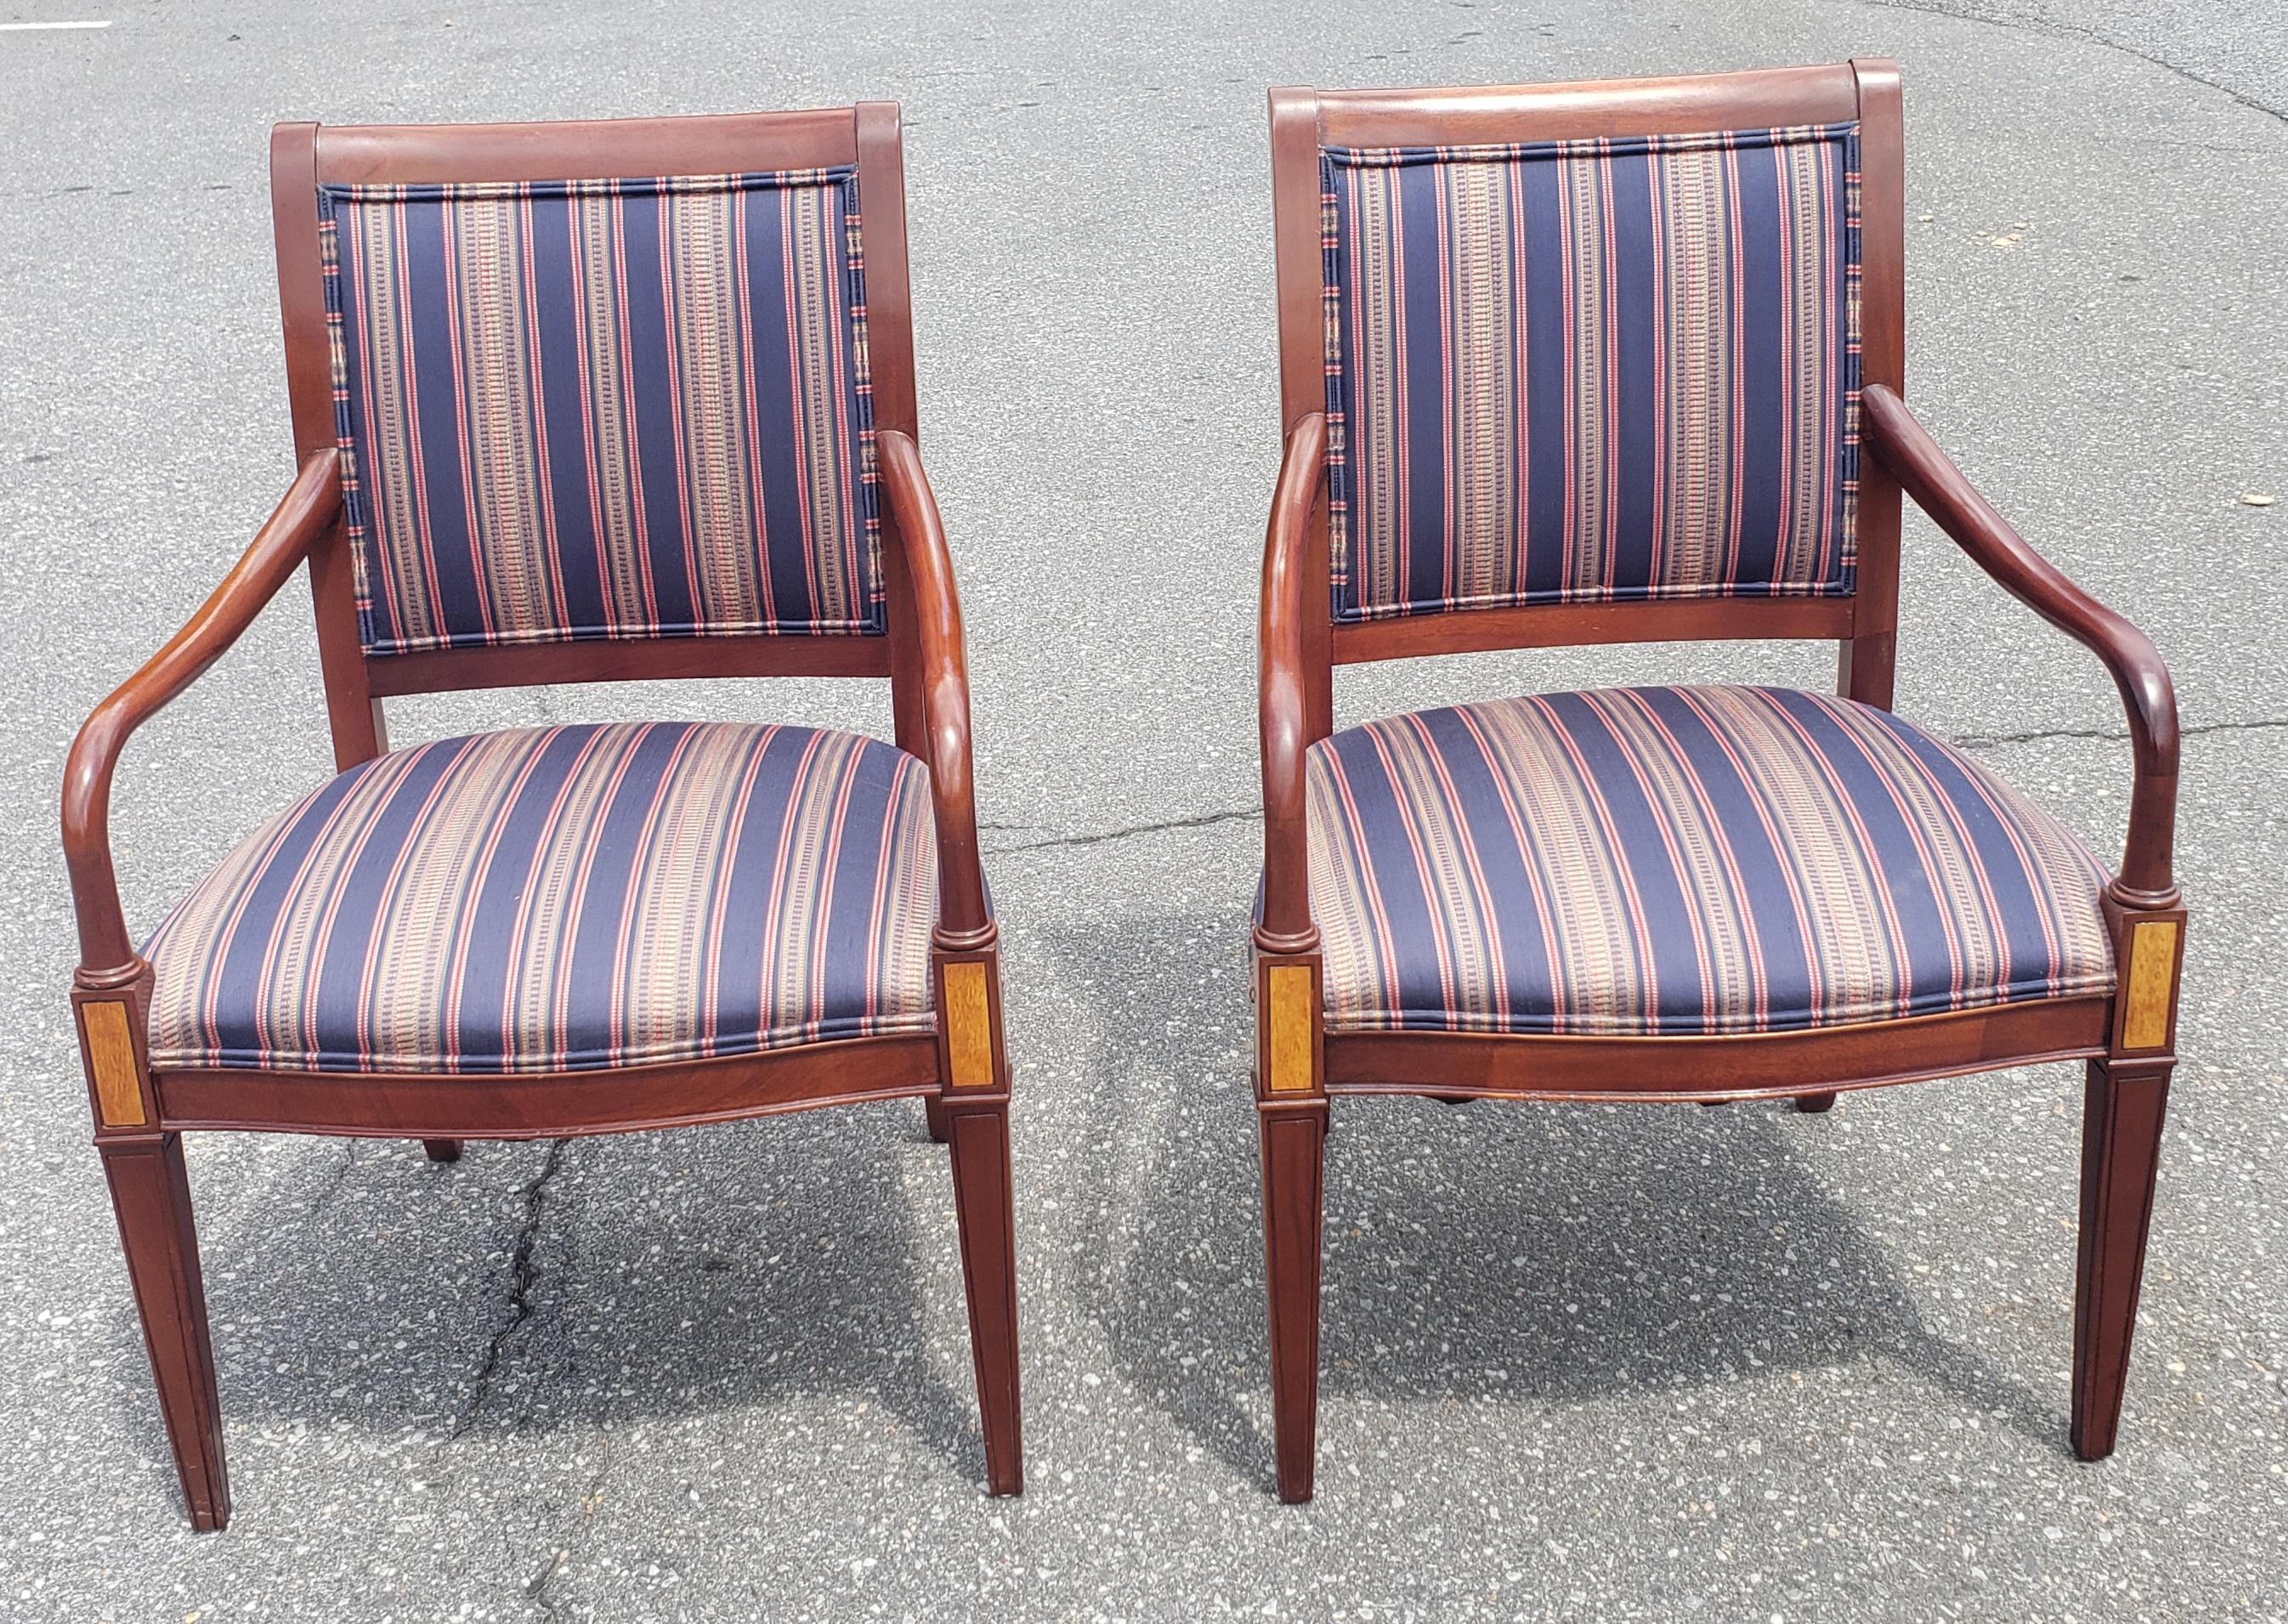 Pair of Hickory Chair Furniture Federal Style Upholstered Mahogany Armchairs in great vintage condition.
Measures 25